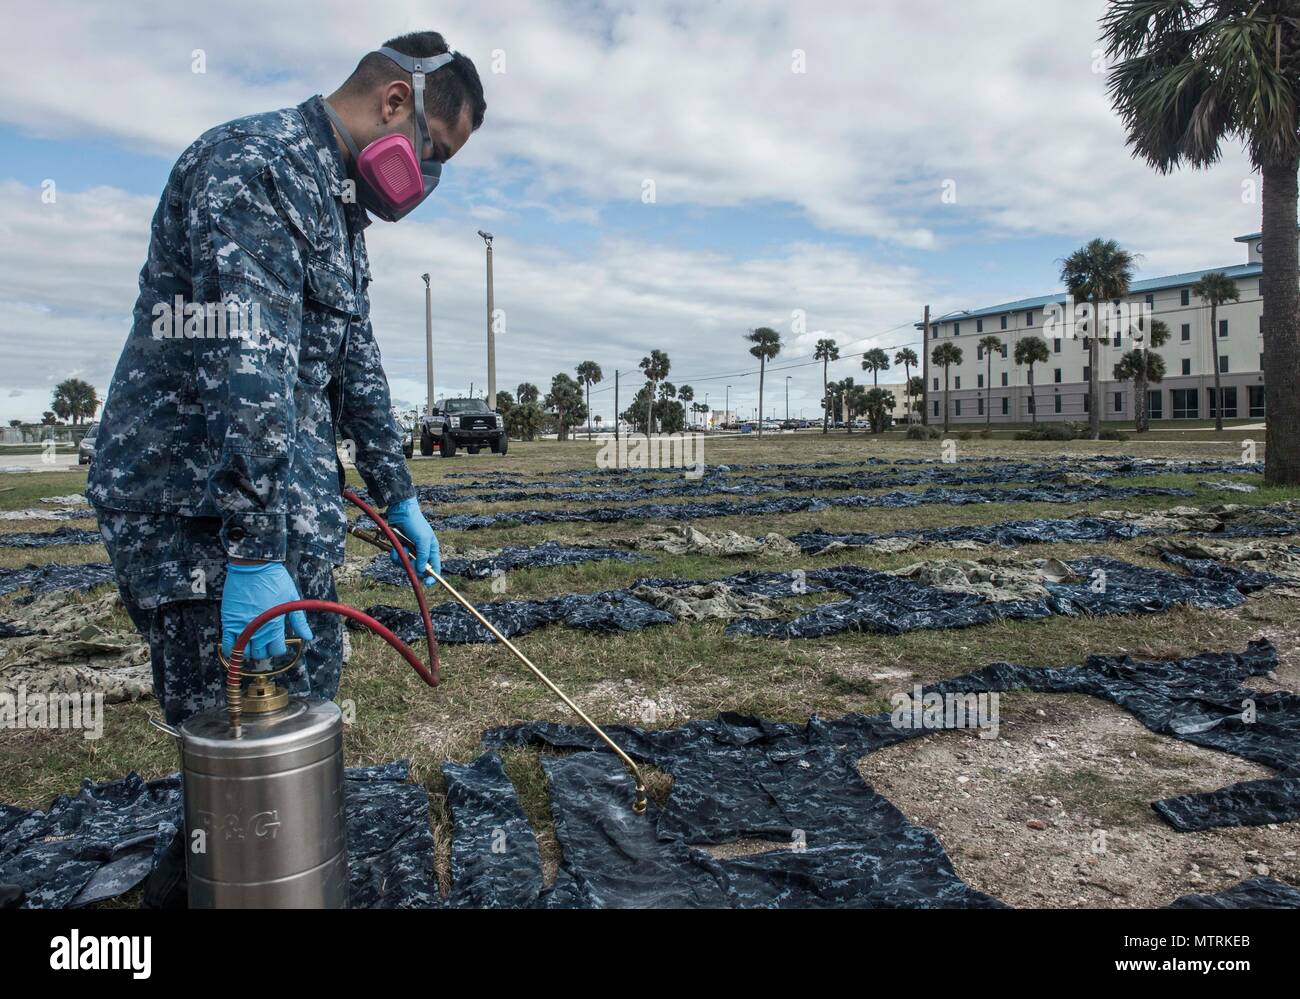 170123-WZ792-022 (Jan. 23, 2017) MAYPORT, Fla. - Hospital Corpsman 3rd Class Joshua Nieto of Navy Entomology Center of Excellence (NECE) Jacksonville, Fla.,  applies the insect repellant Permethrin to uniforms at Naval Station Mayport, Fla. Treating uniforms is one of many preparations  service members are taking before departing on Continuing Promise 2017 (CP-17). Continuing Promise 2017 is a U.S. Southern Command-sponsored and U.S. Naval Forces Southern Command/U.S. 4th Fleet-conducted deployment to conduct civil-military operations including humanitarian assistance, training engagements, an Stock Photo